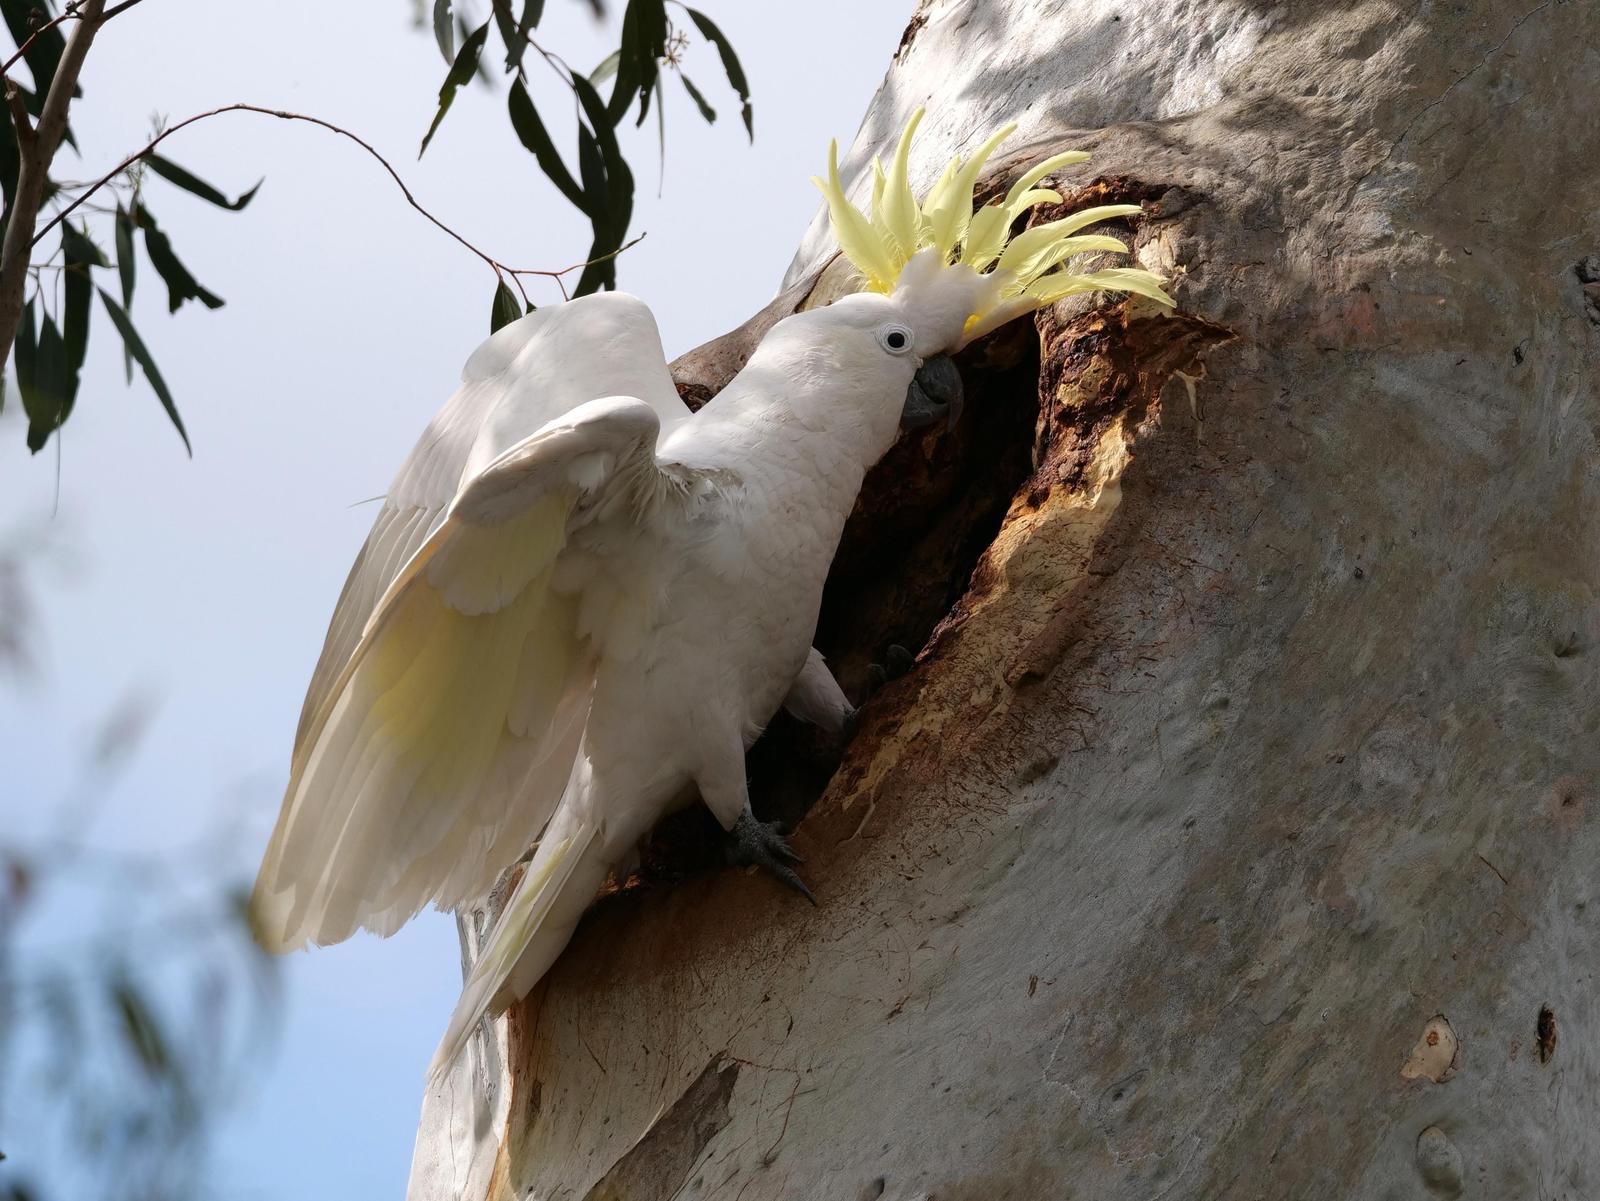 Sulphur-crested Cockatoo Photo by Peter Lowe